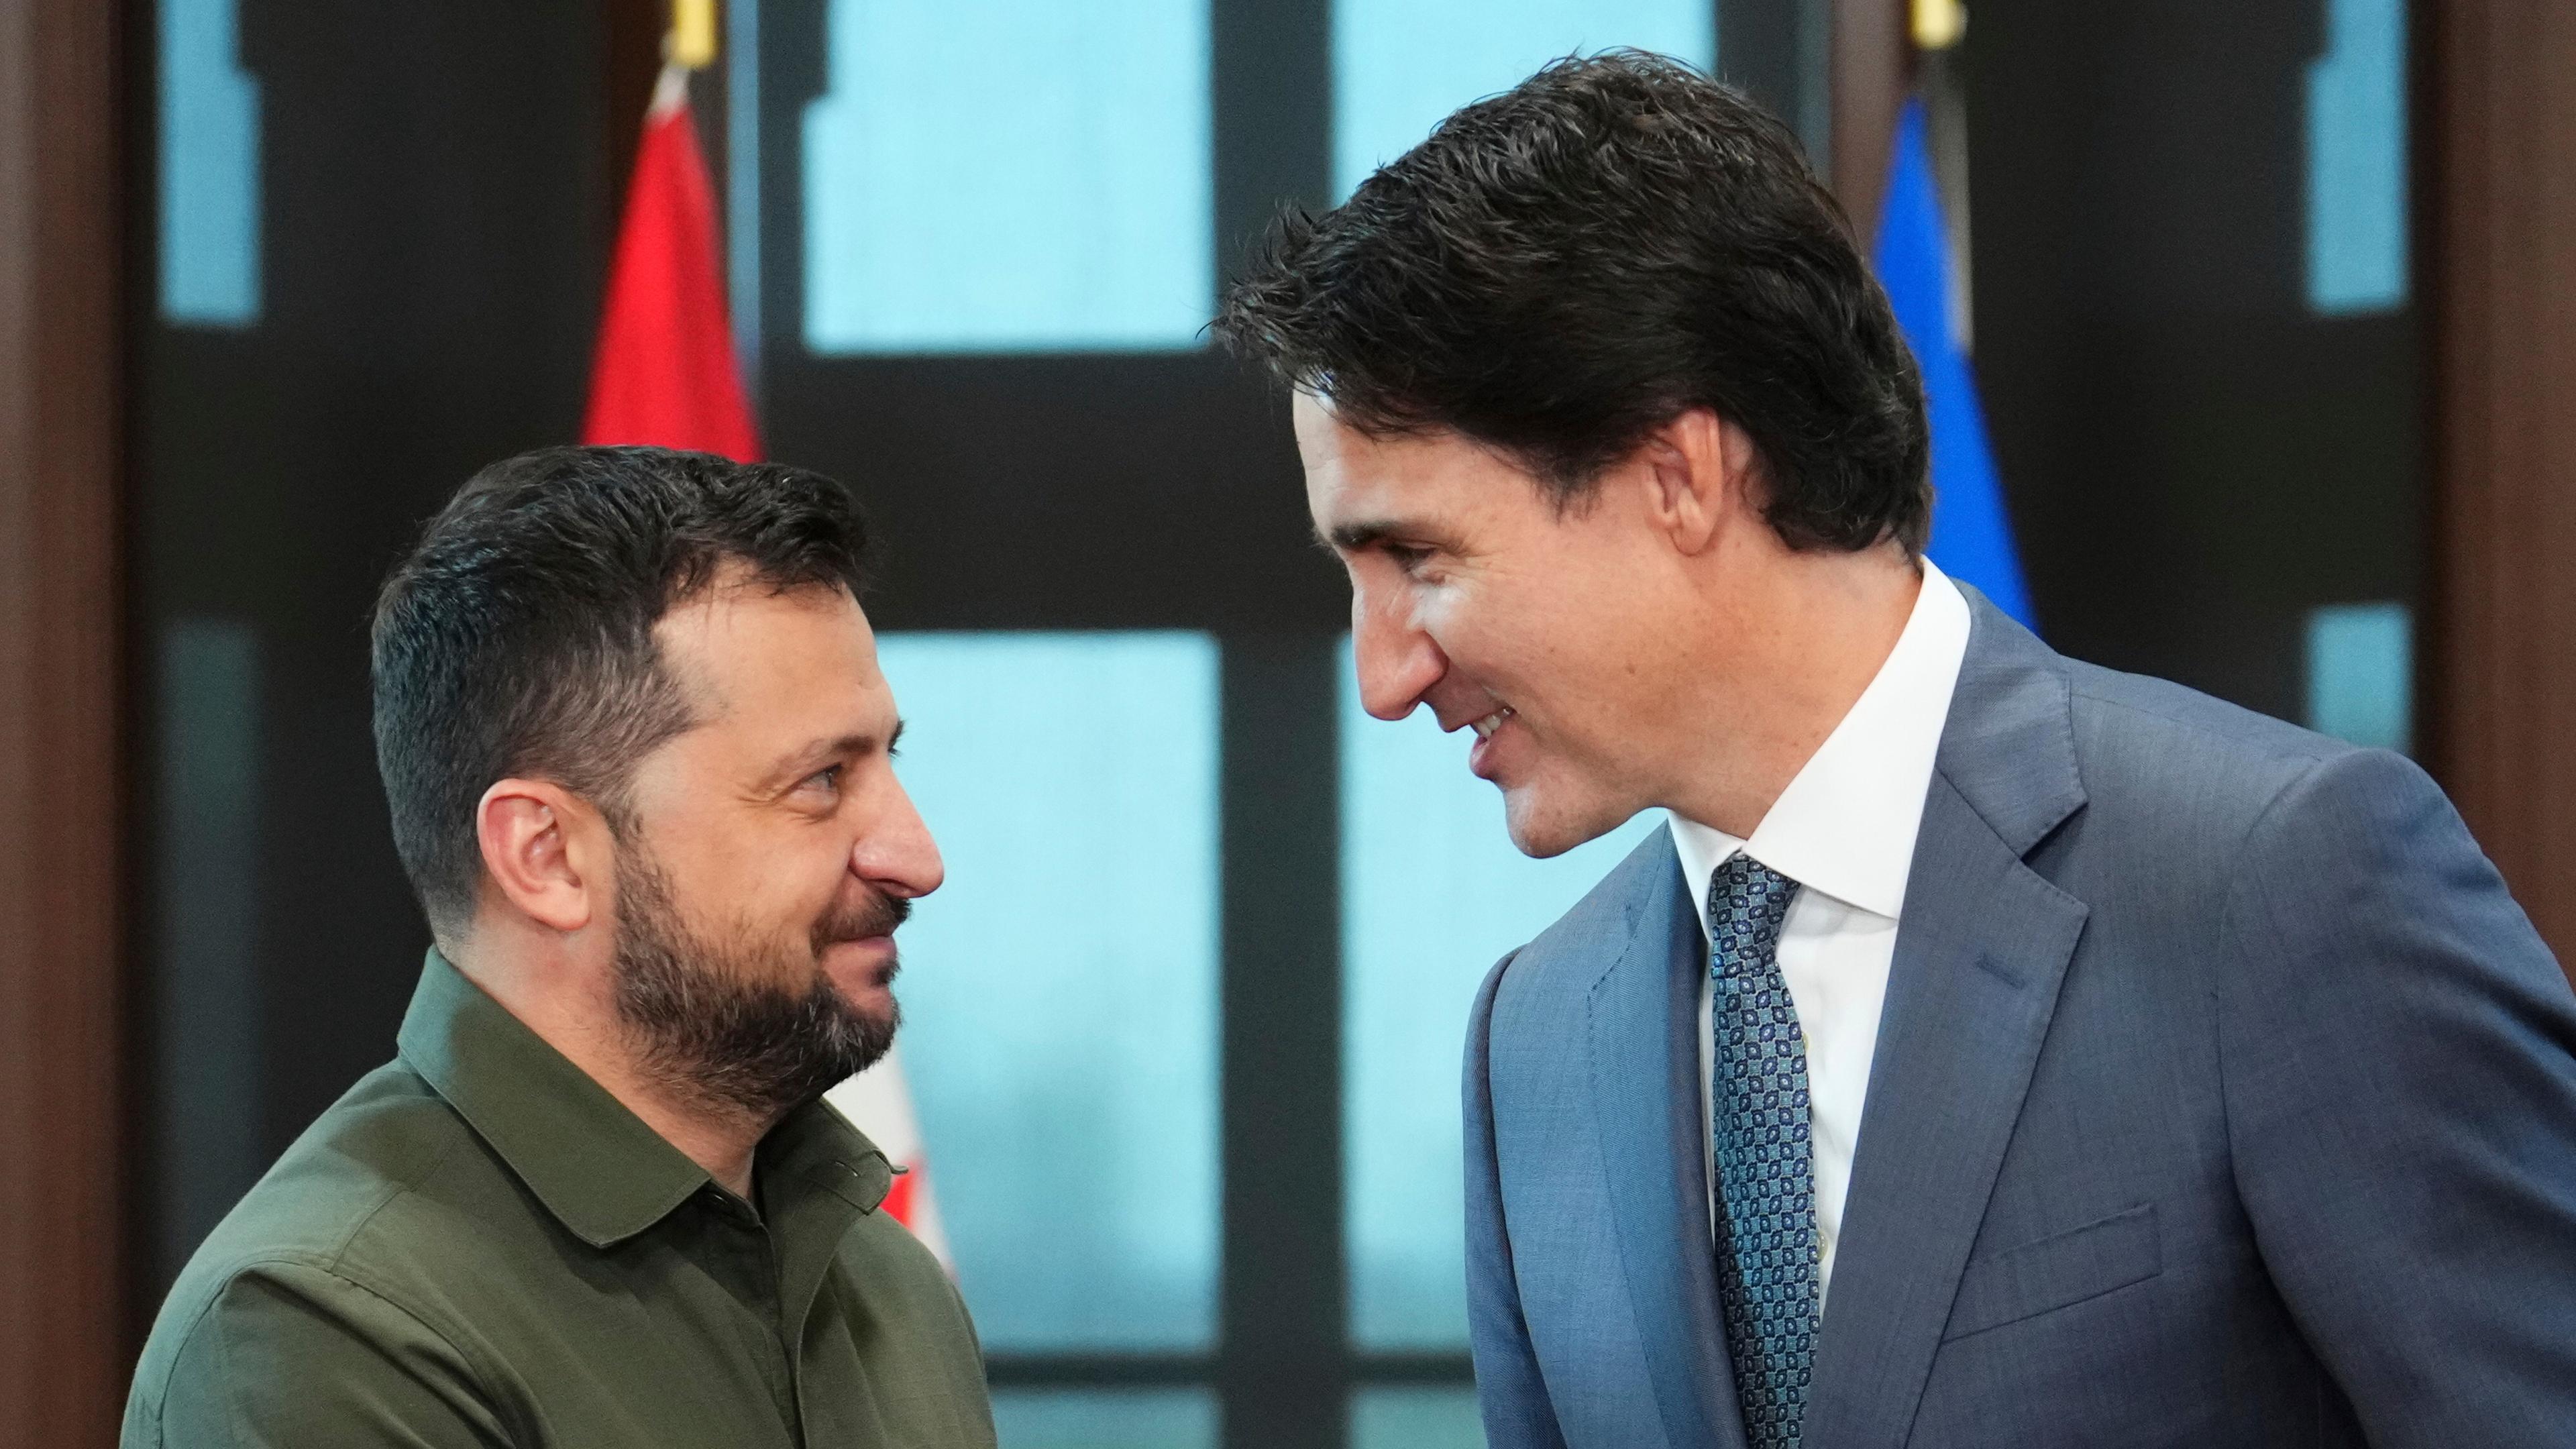 Canada promises new aid package to Ukraine